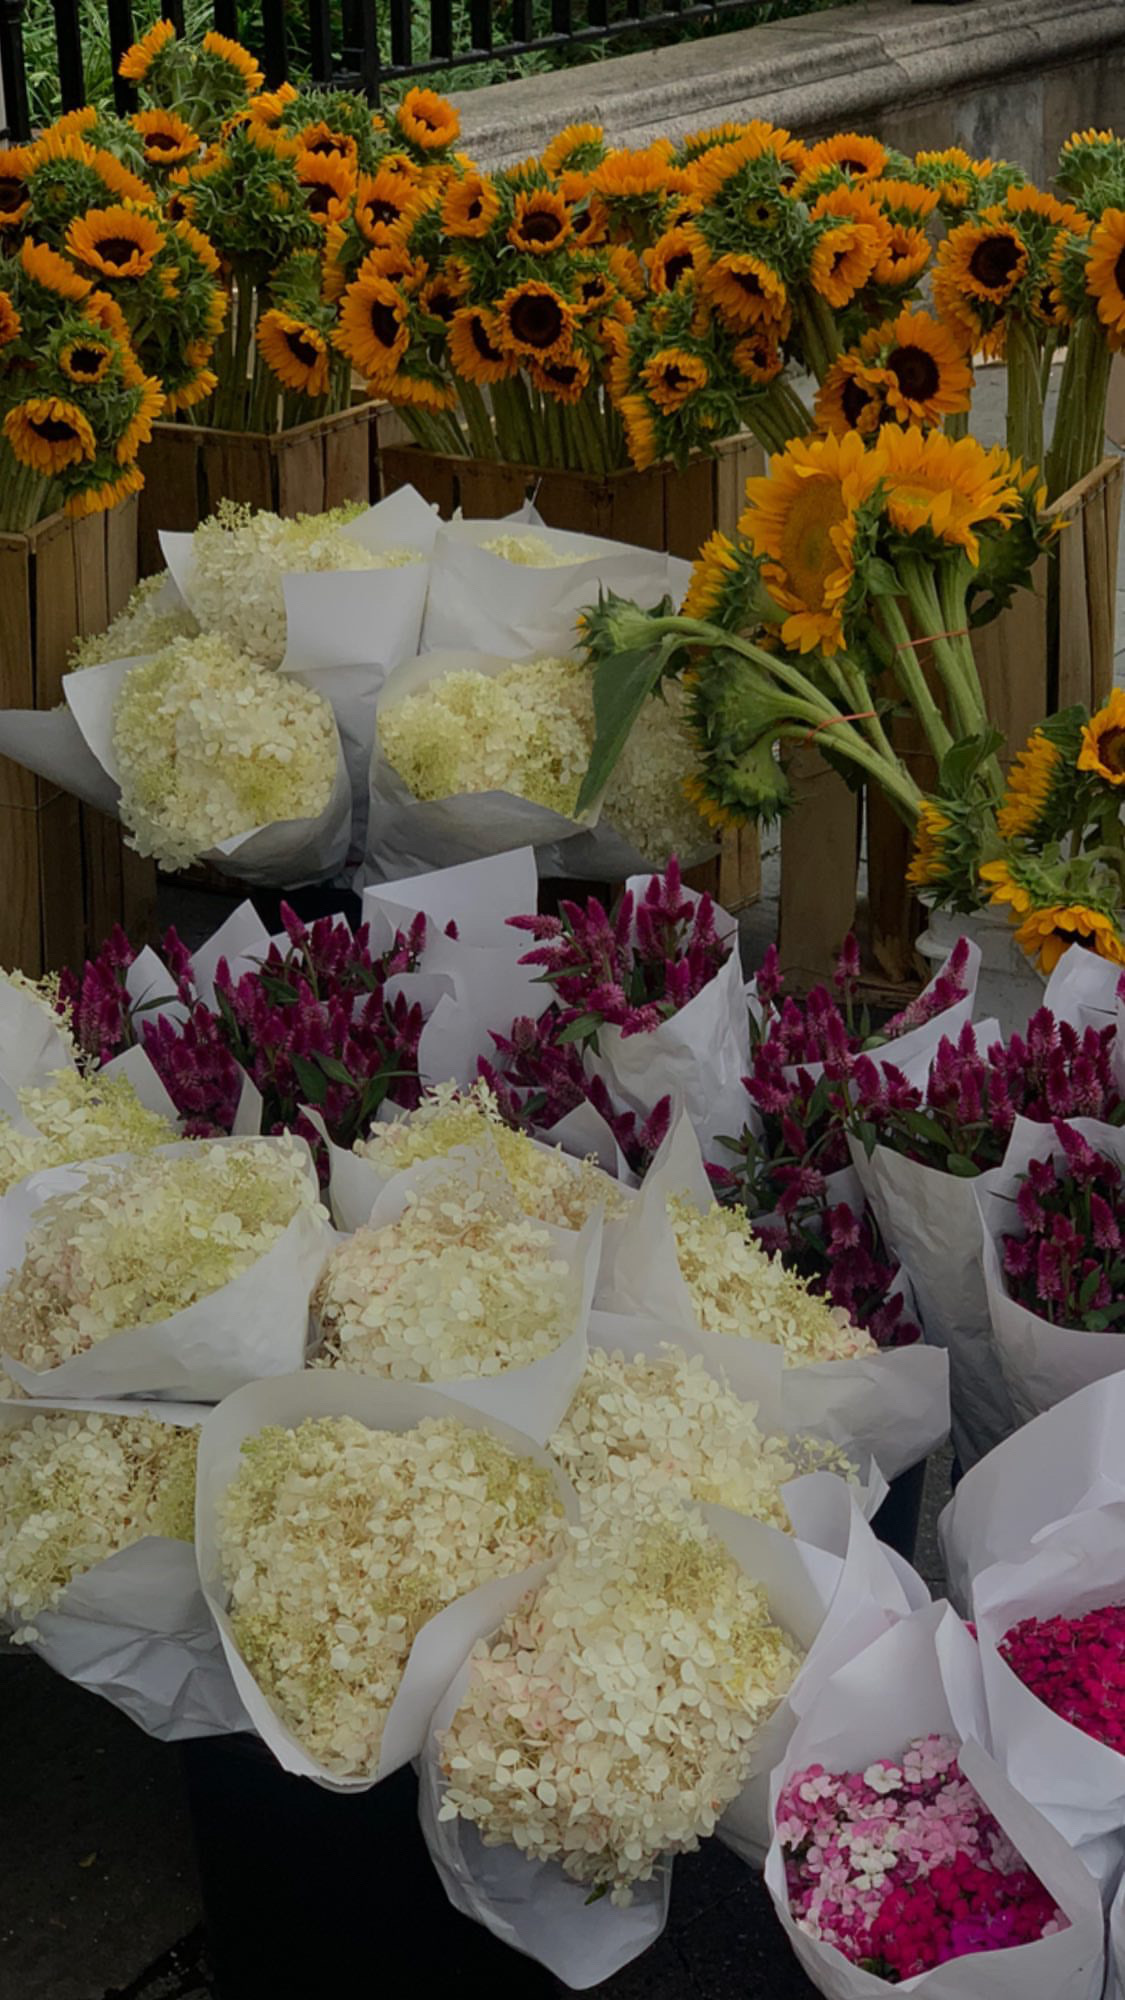 A display of various colorful bouquets.